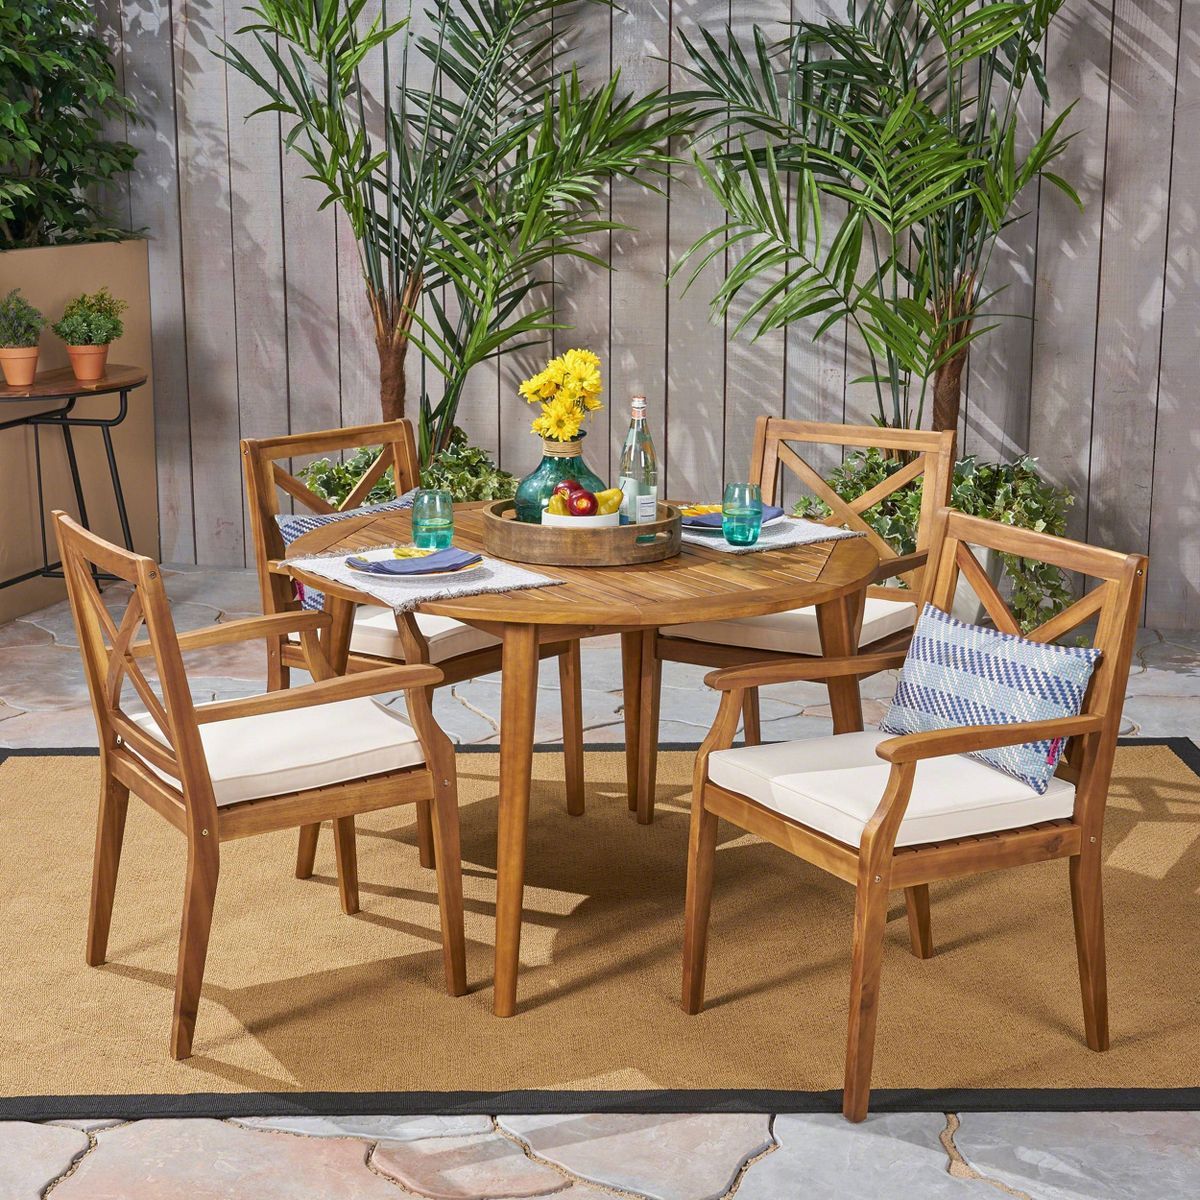 Pines 5pc Acacia Wood Outdoor Dining Set - Teak/Cream - Christopher Knight Home, Weather-Resistan... | Target